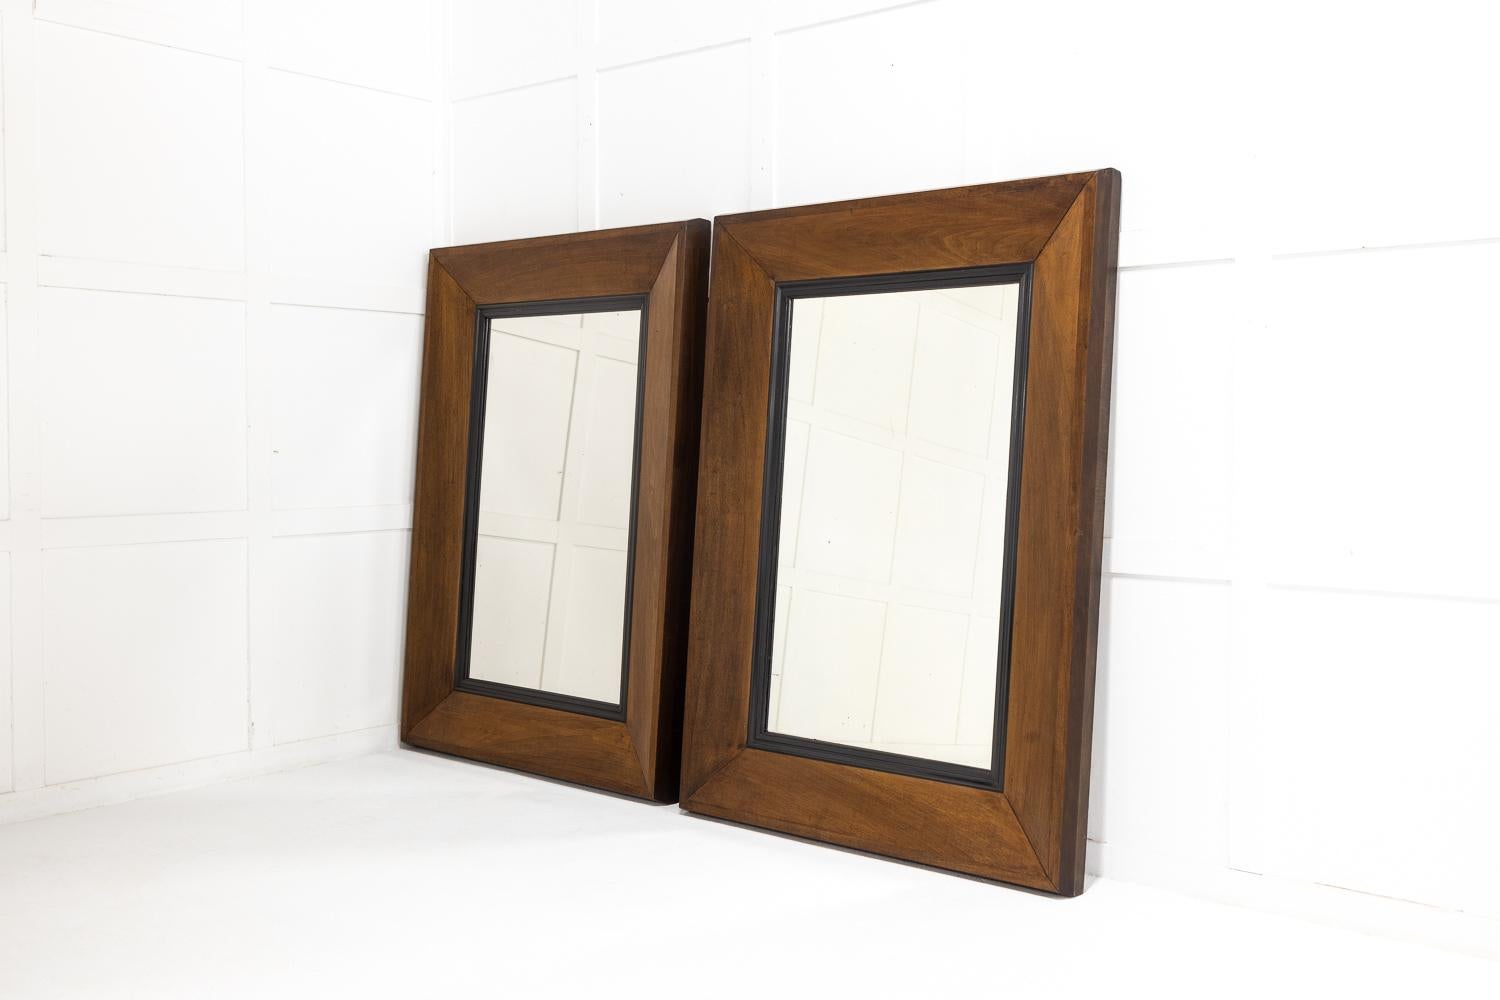 An attractive large pair of 19th Century French mirrors with simple wide oak frames and ebonised slips.

Contemporary lines suiting both classical and modern rooms alike.
 